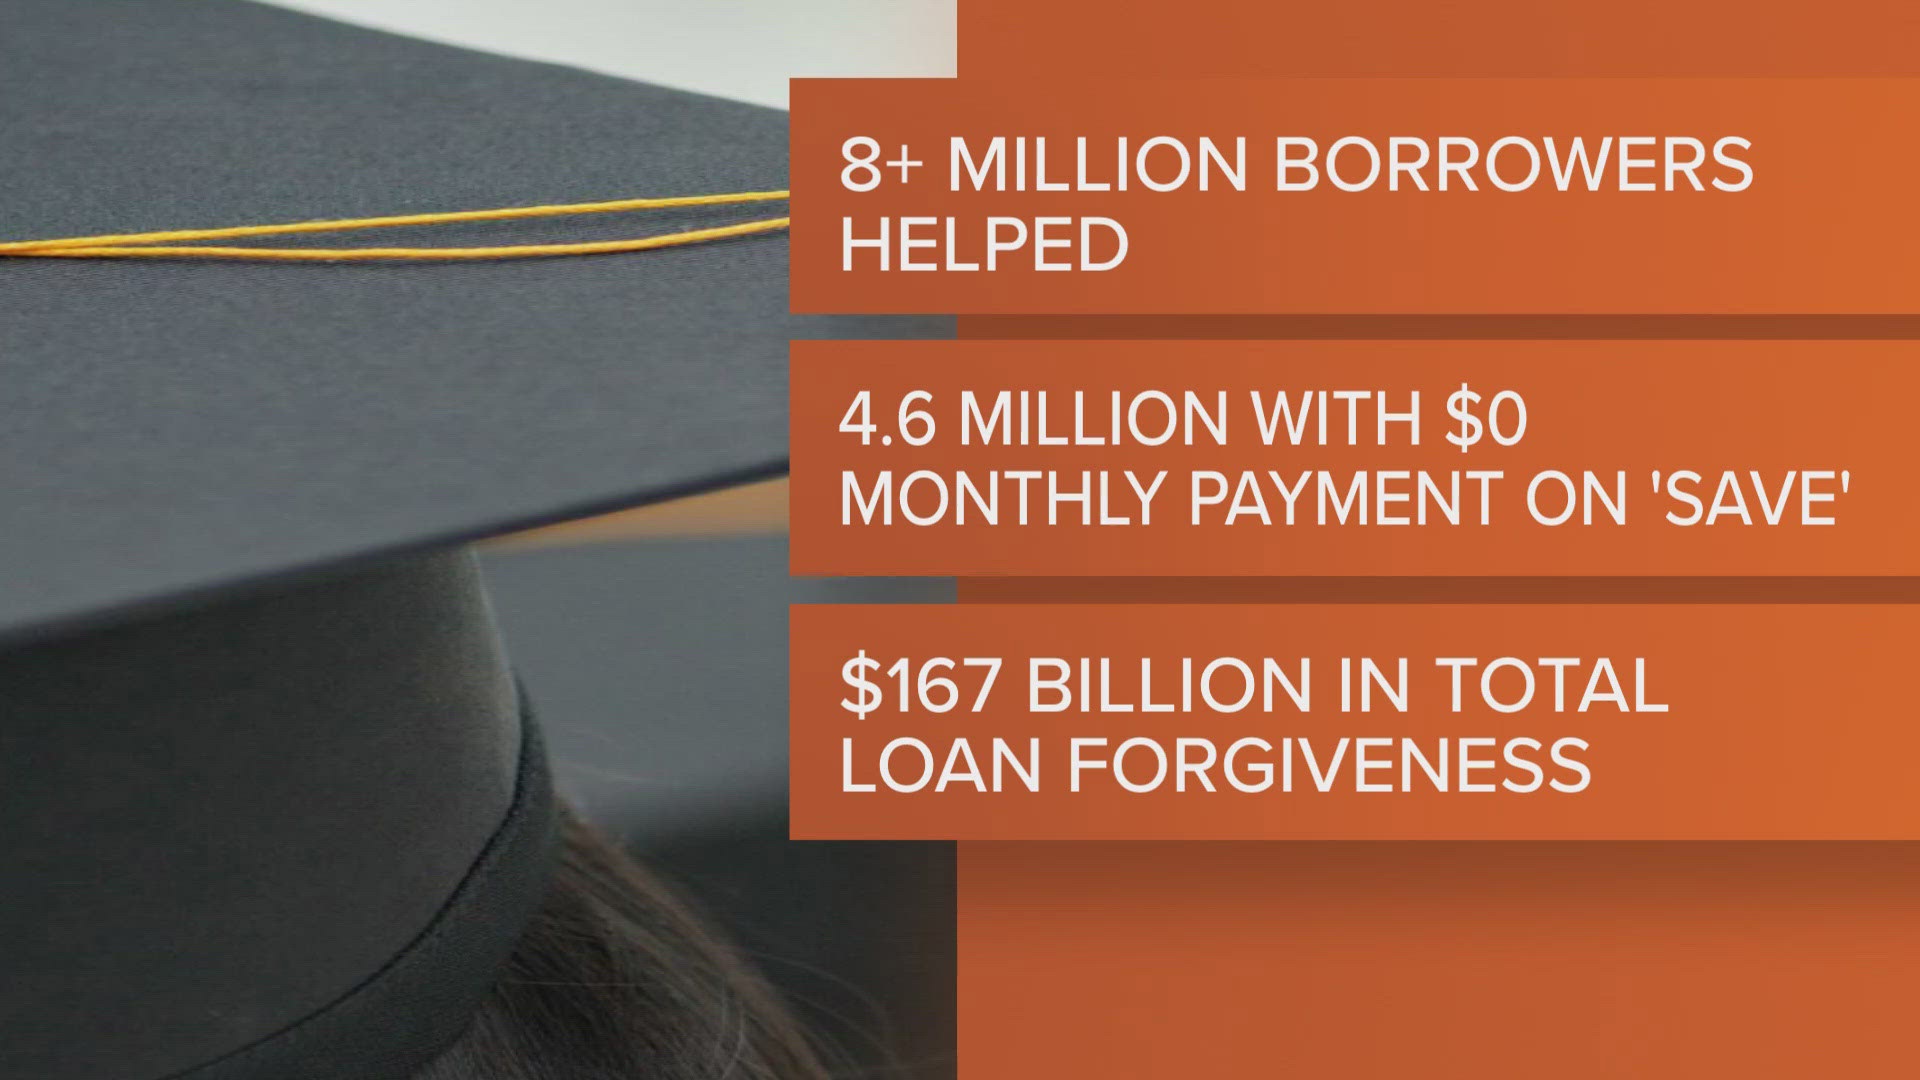 Another round of student loan cuts debt for 160,000